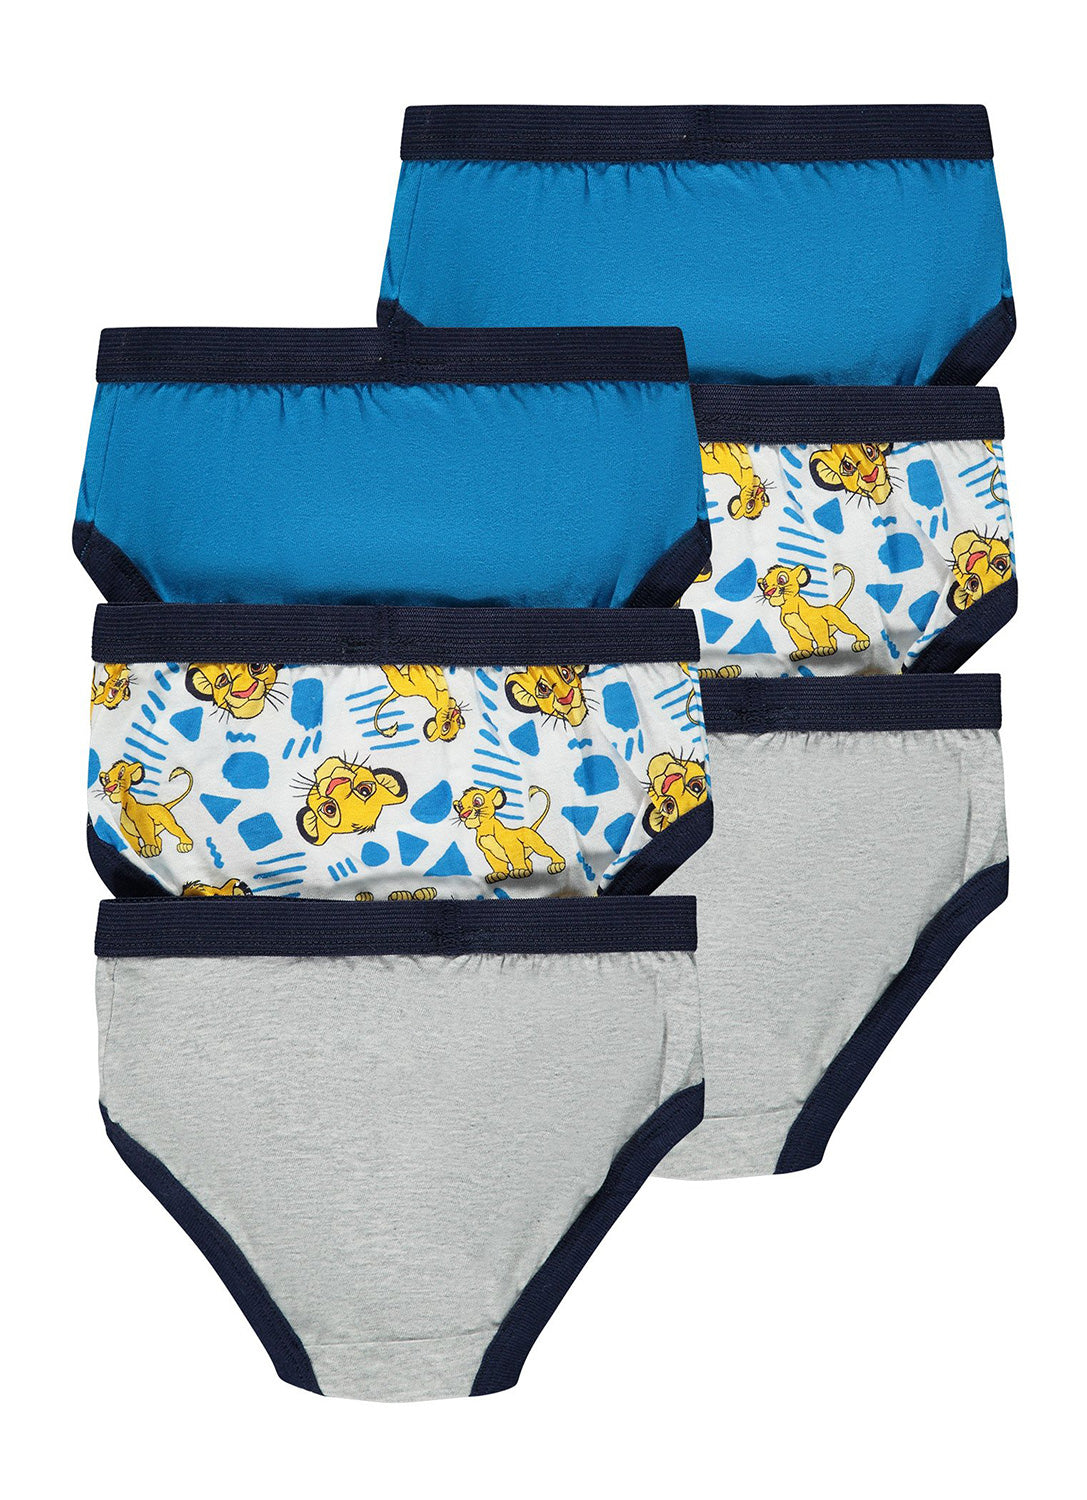 Back view 6 Boys briefs in 3 colours with Lion King prints